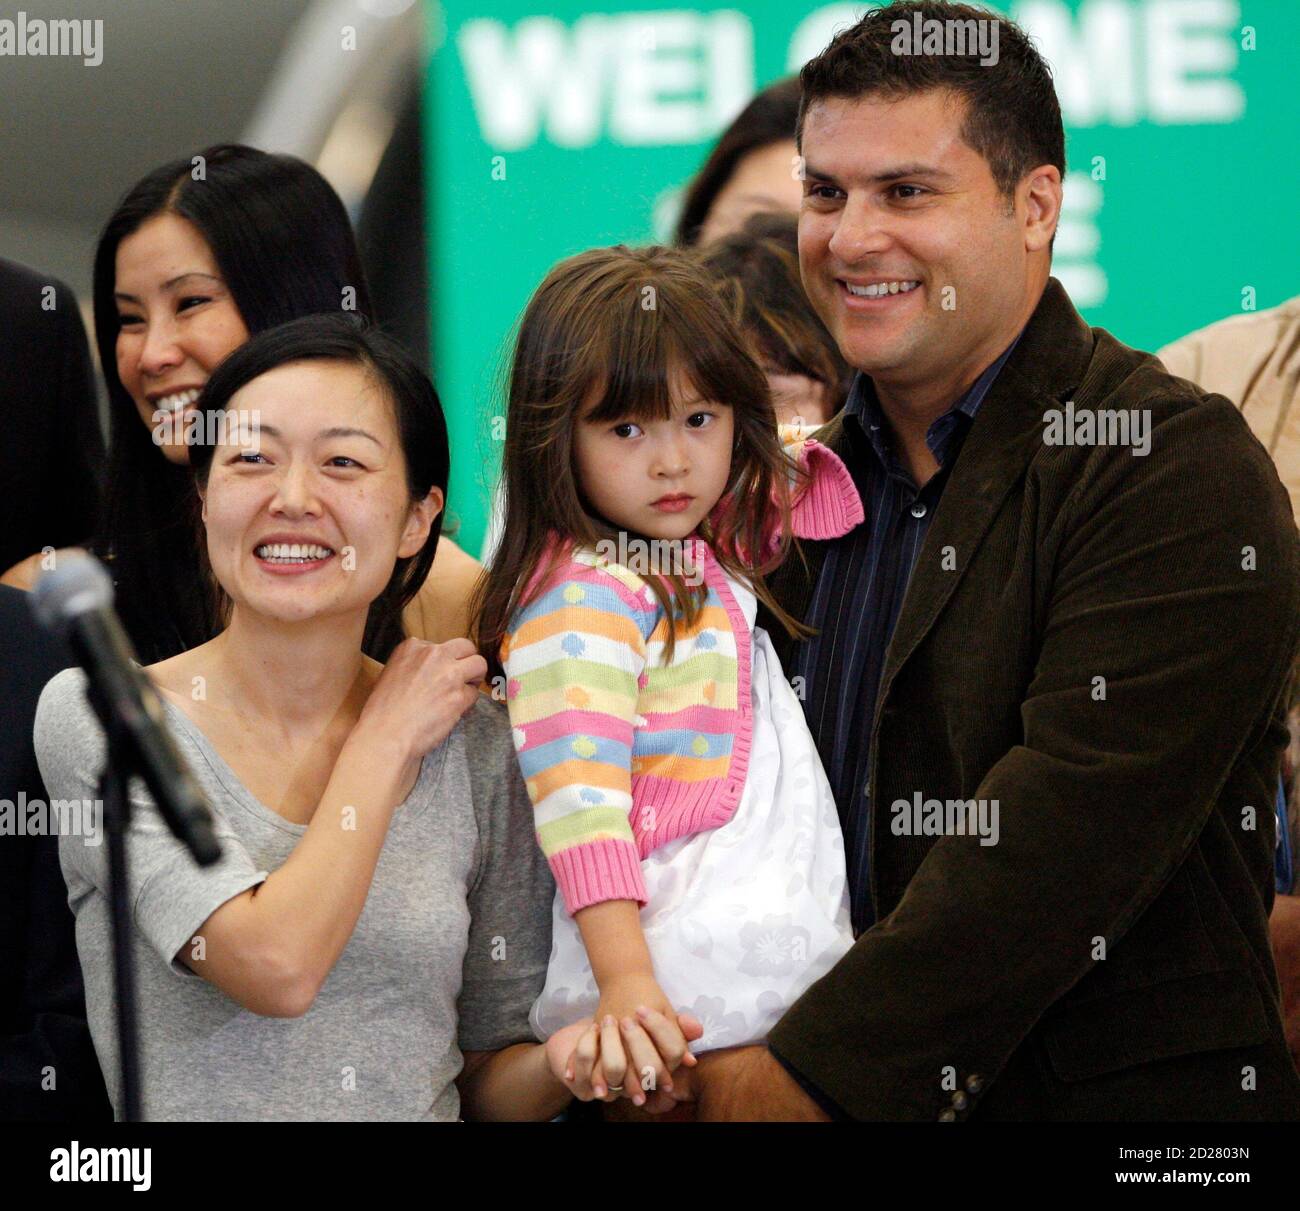 Freed Current TV journalist Euna Lee (behind microphone) smiles after being  reunited with her husband Michael Saldate (R) and daughter Hana Saldate in  Burbank, California, August 5, 2009. Lee and fellow journalist